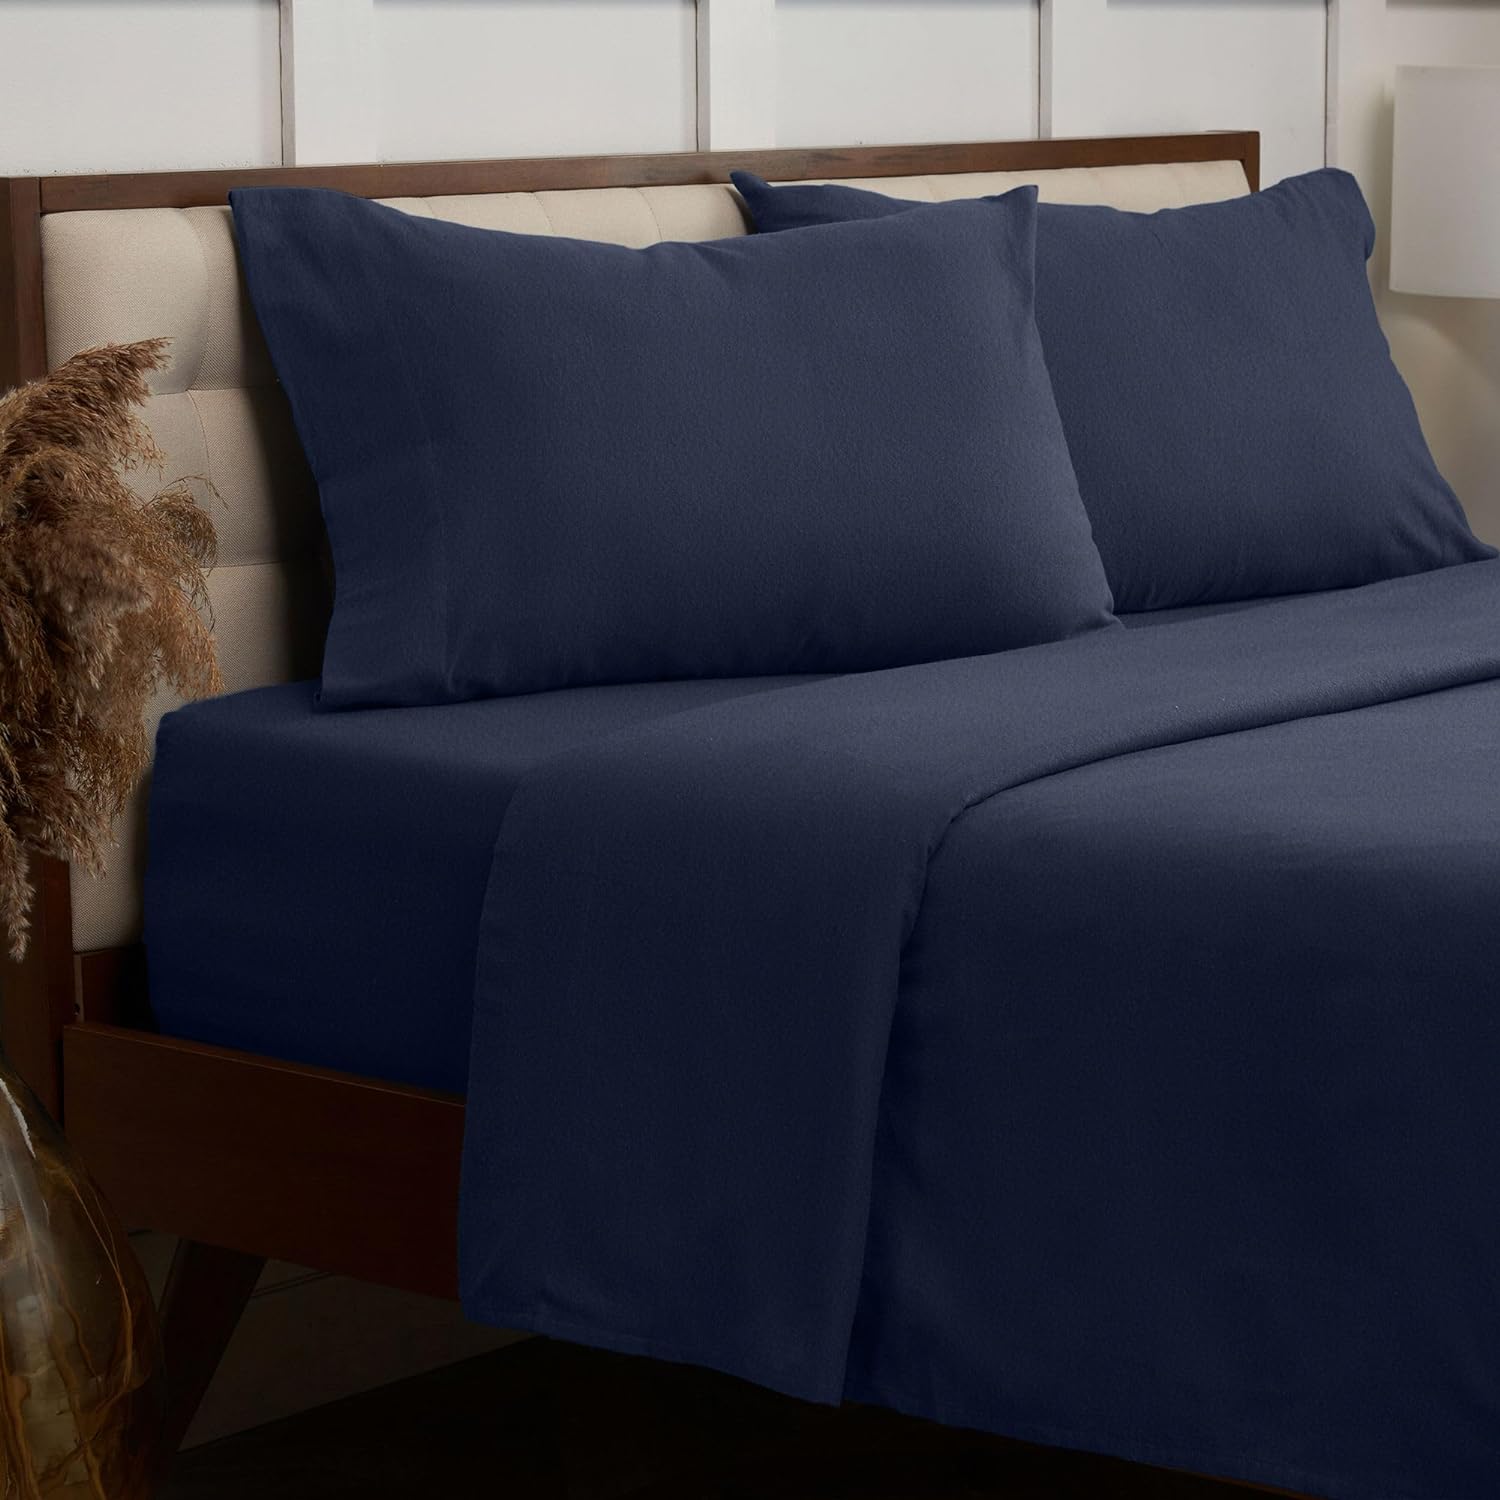 Mellanni 100% Cotton Flannel Full Sheets Set - Double Brushed for Extra Softness & Warmth - Luxury Lightweight Navy Blue Sheets Set - Deep Pocket Fitted Sheet up to 16 inch - 4 PC Set (Full, Navy) 